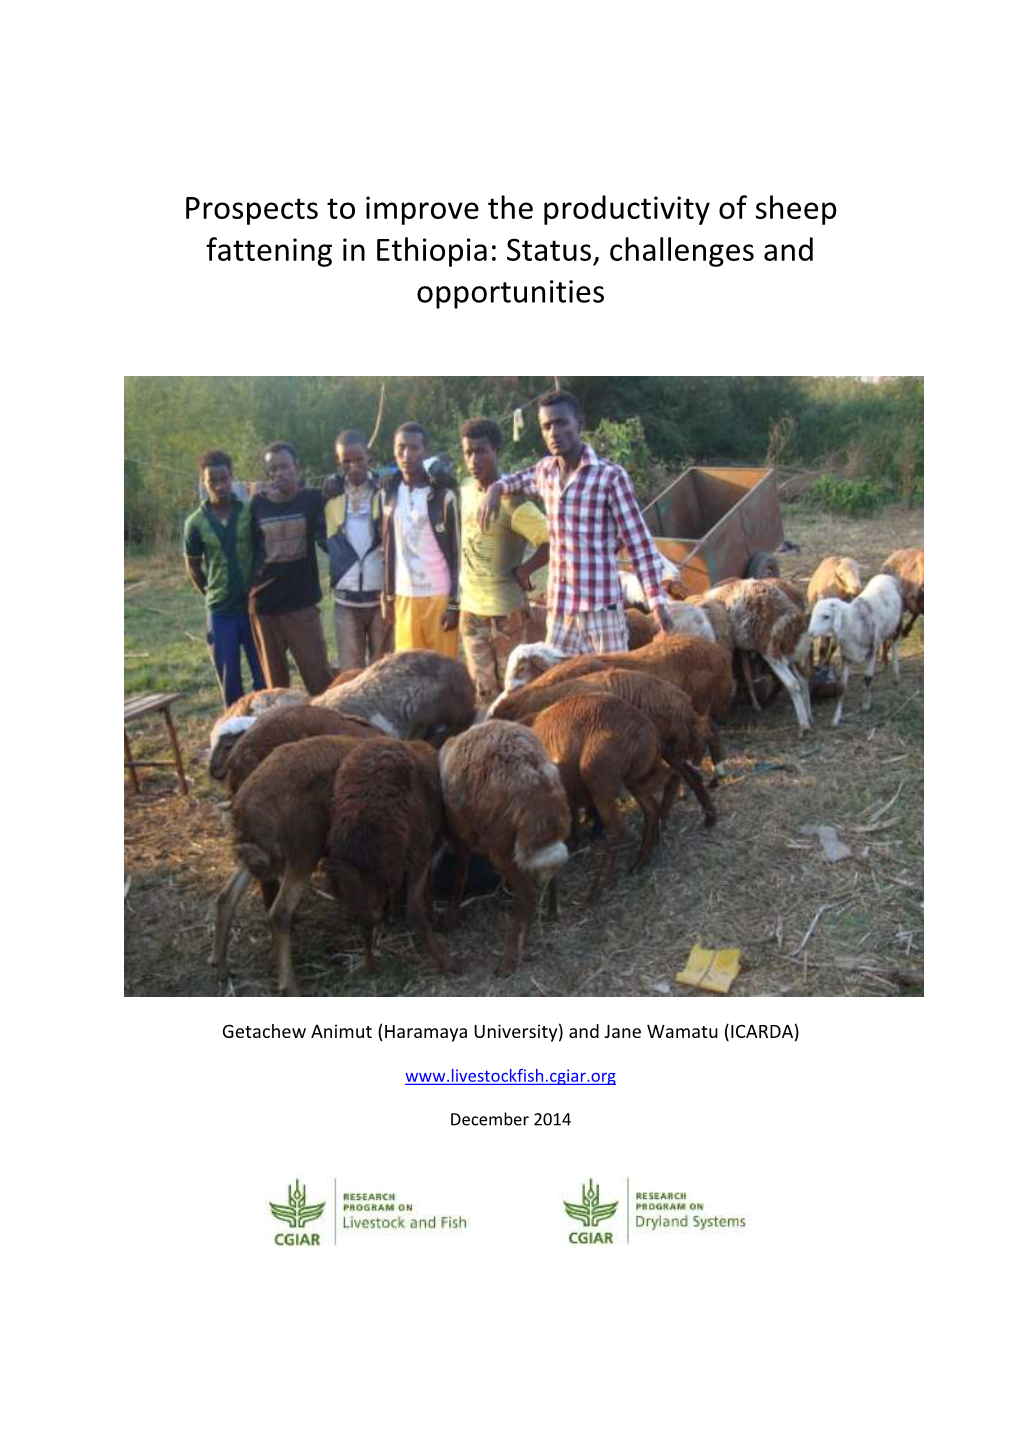 Prospects to Improve the Productivity of Sheep Fattening in Ethiopia: Status, Challenges and Opportunities